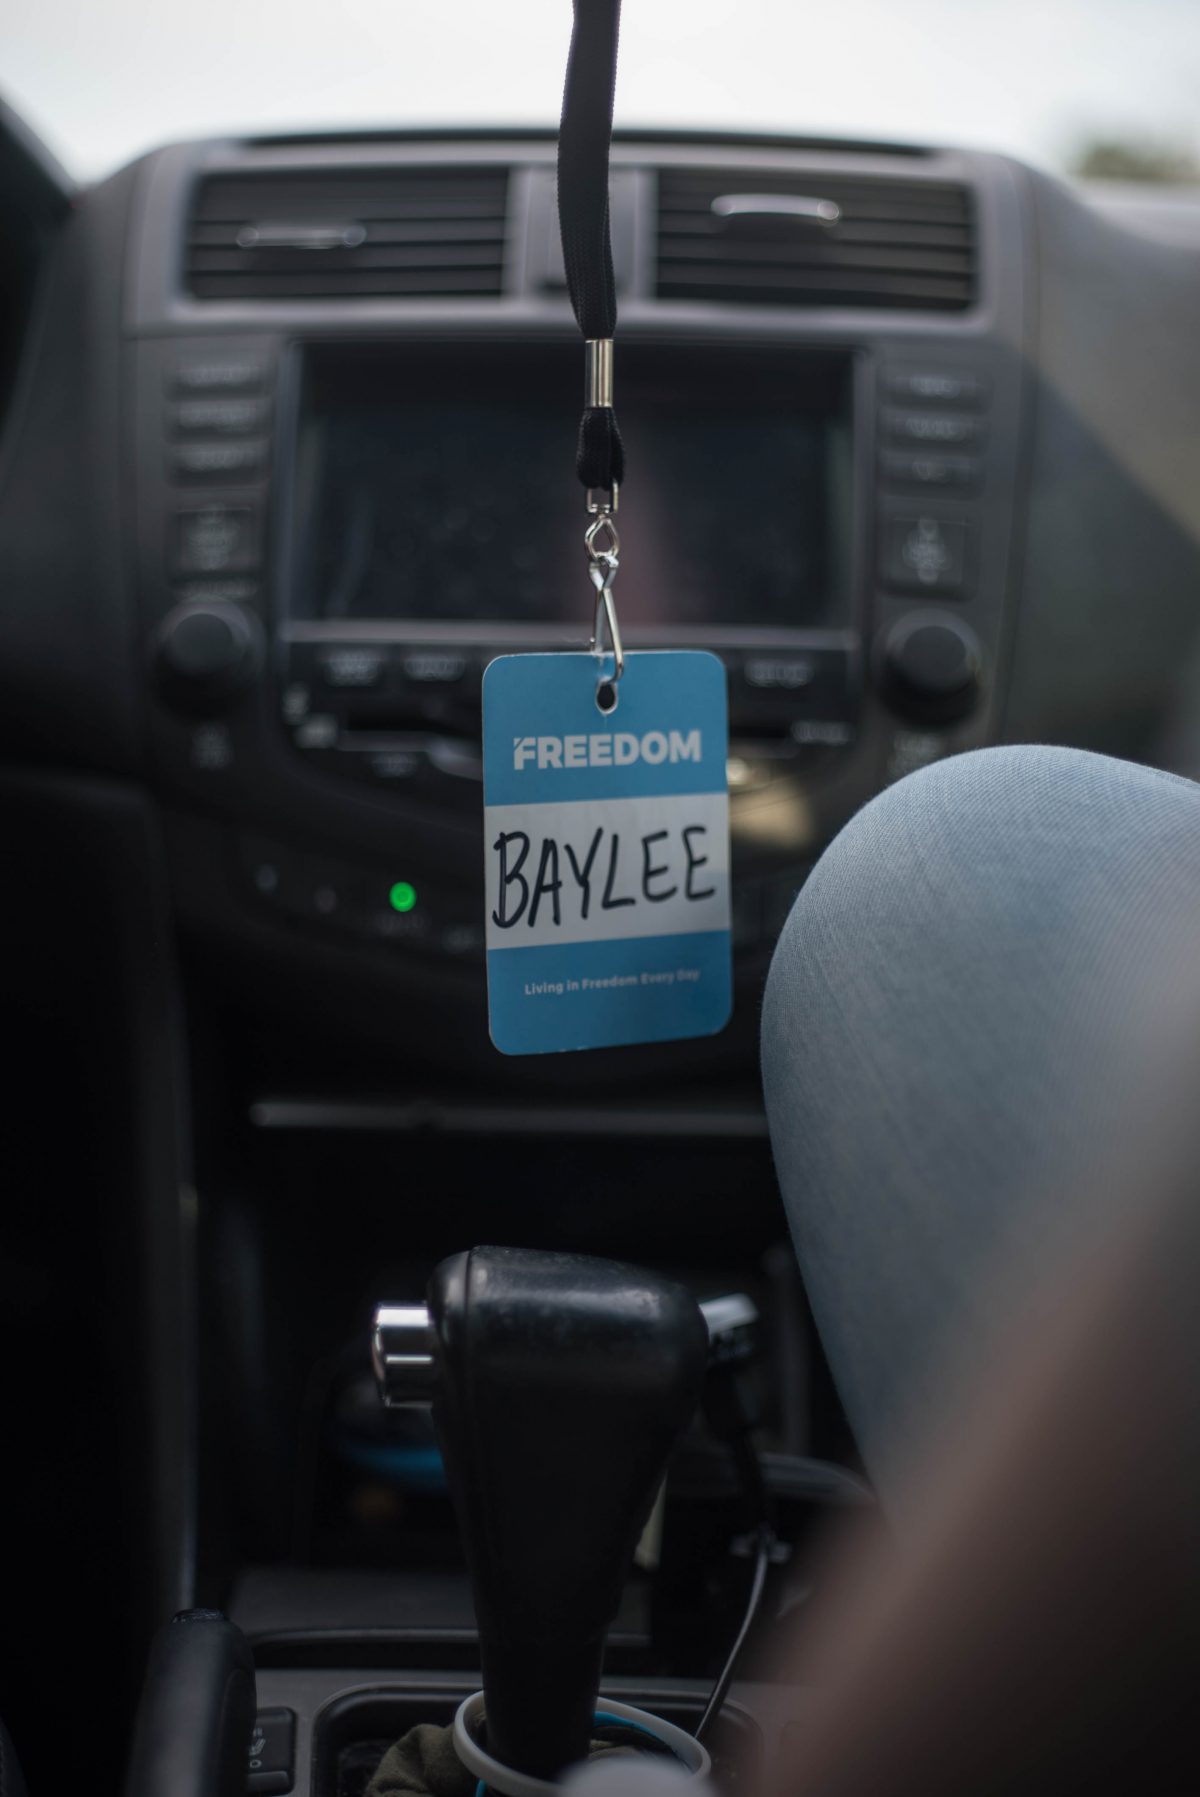 Baylee identification card with blue lanyard